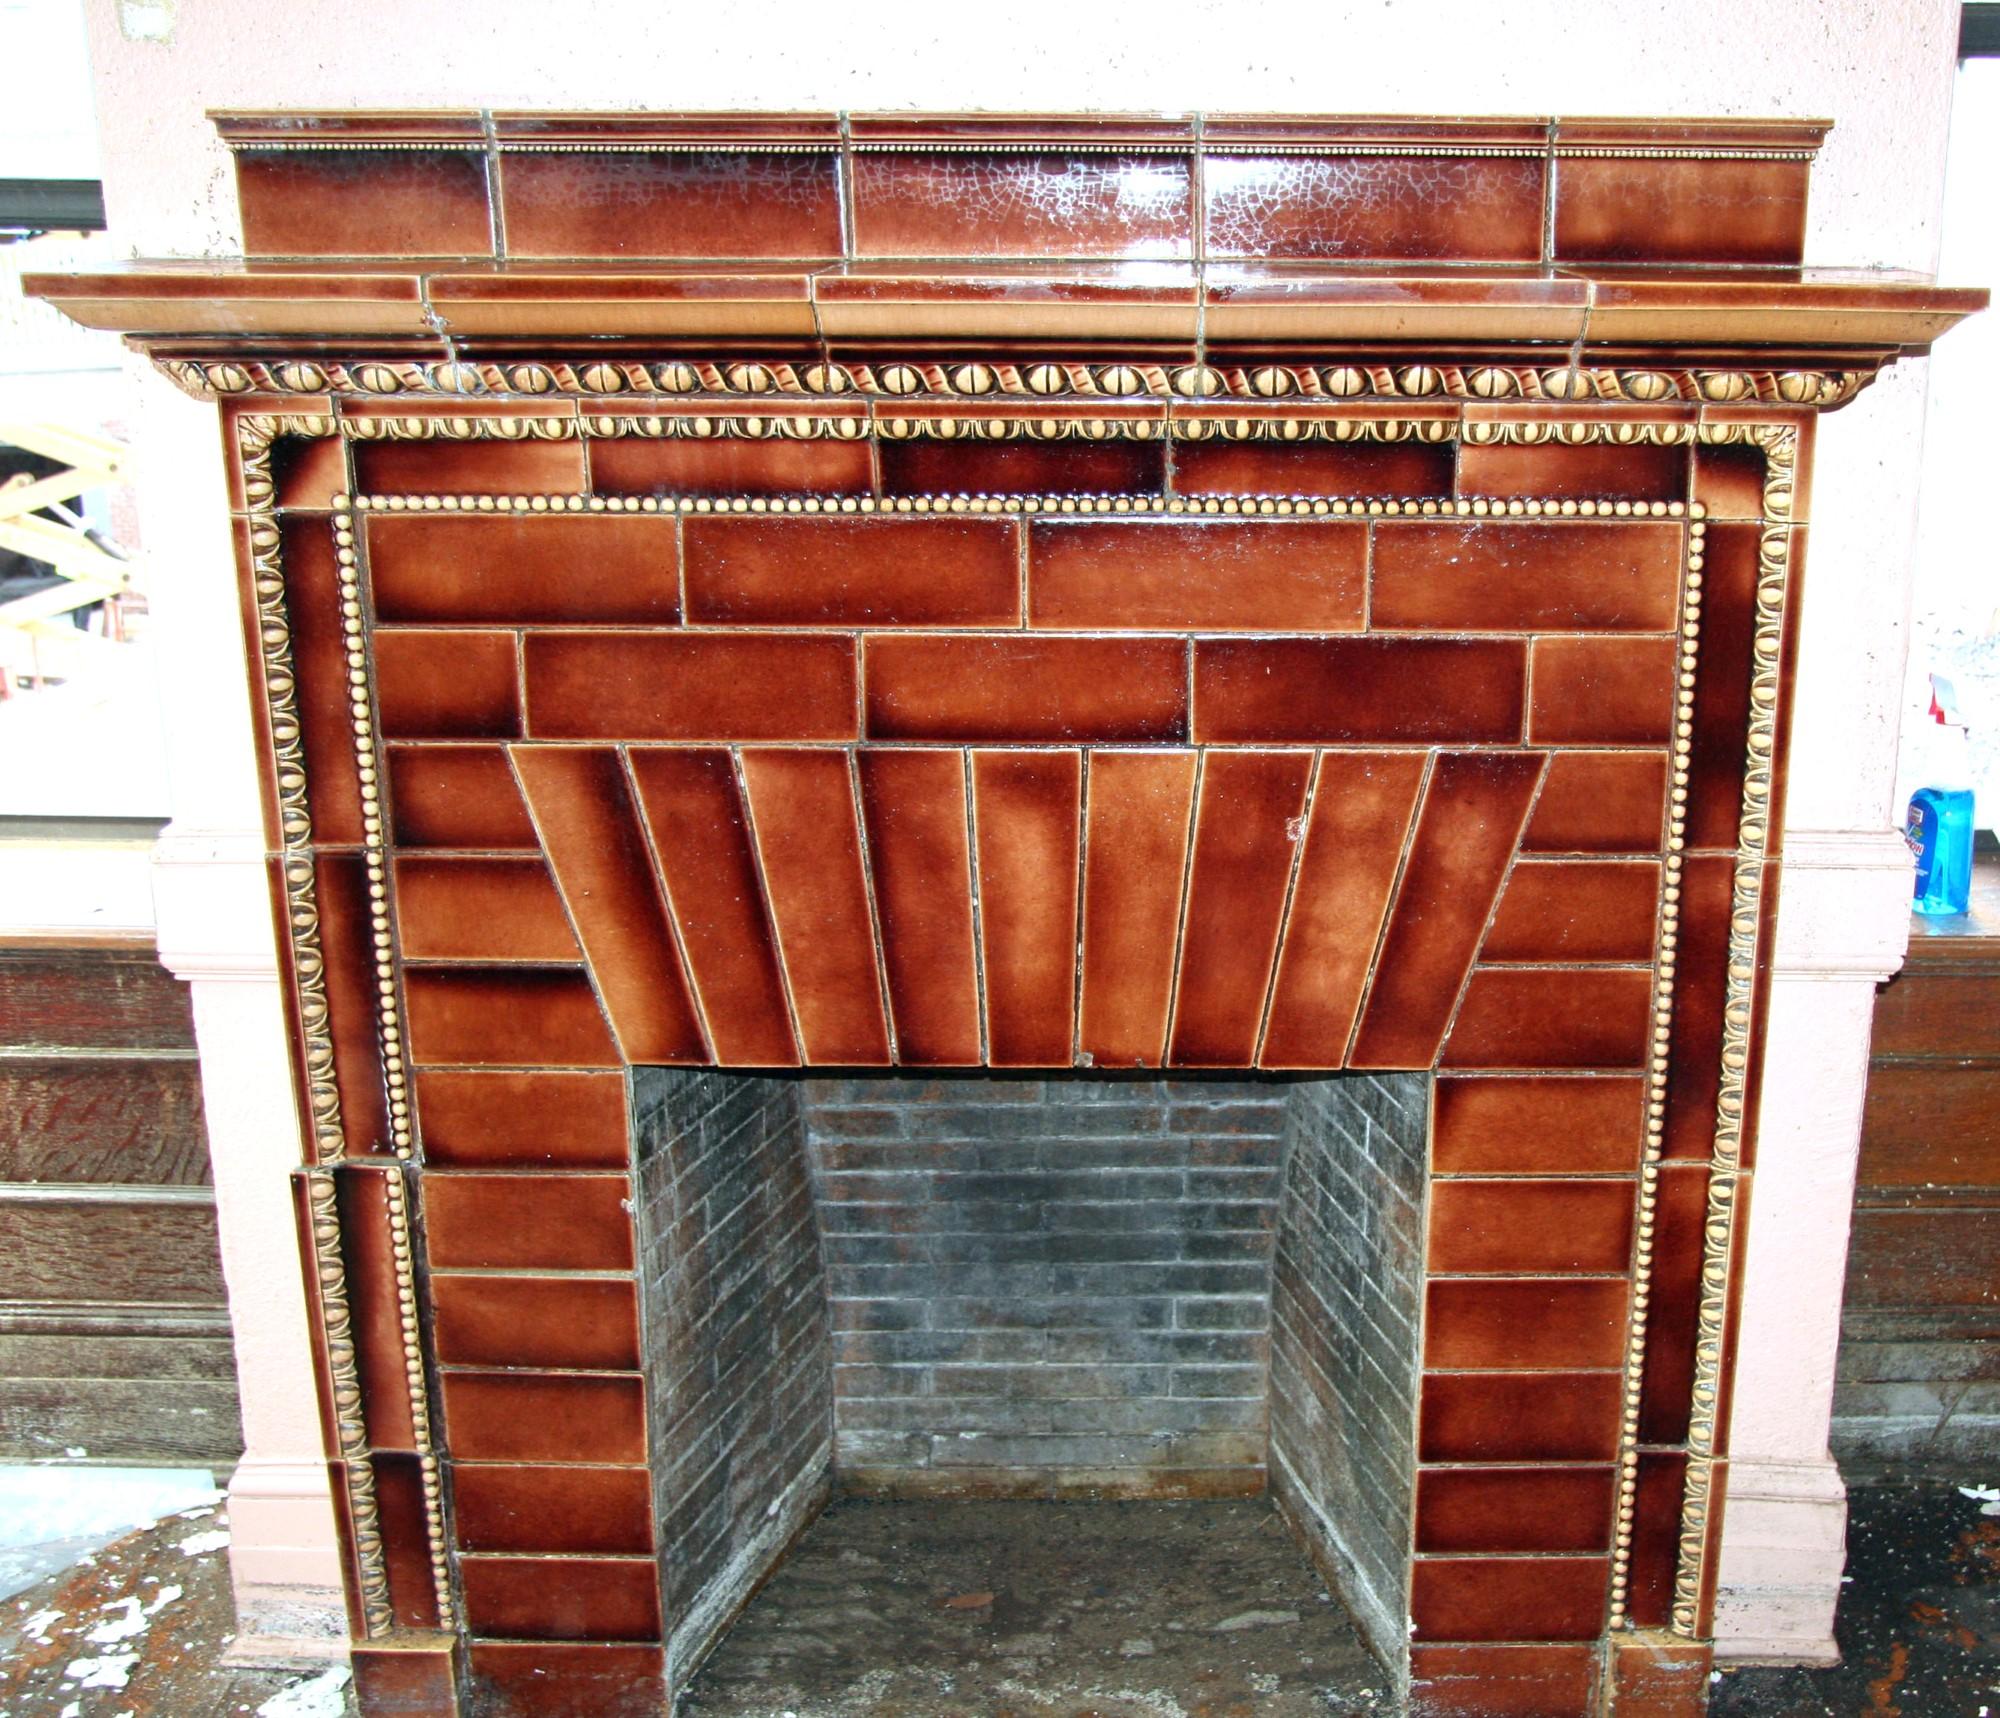 A very beautiful ceramic tile mantel. We salvaged this ceramic mantel out of the famous Iver Johnson building in Fitchburg, MA. Thick and big with original crackling. These ceramic mantels were manufactured by the Hartford Faience Co. of Hartford,